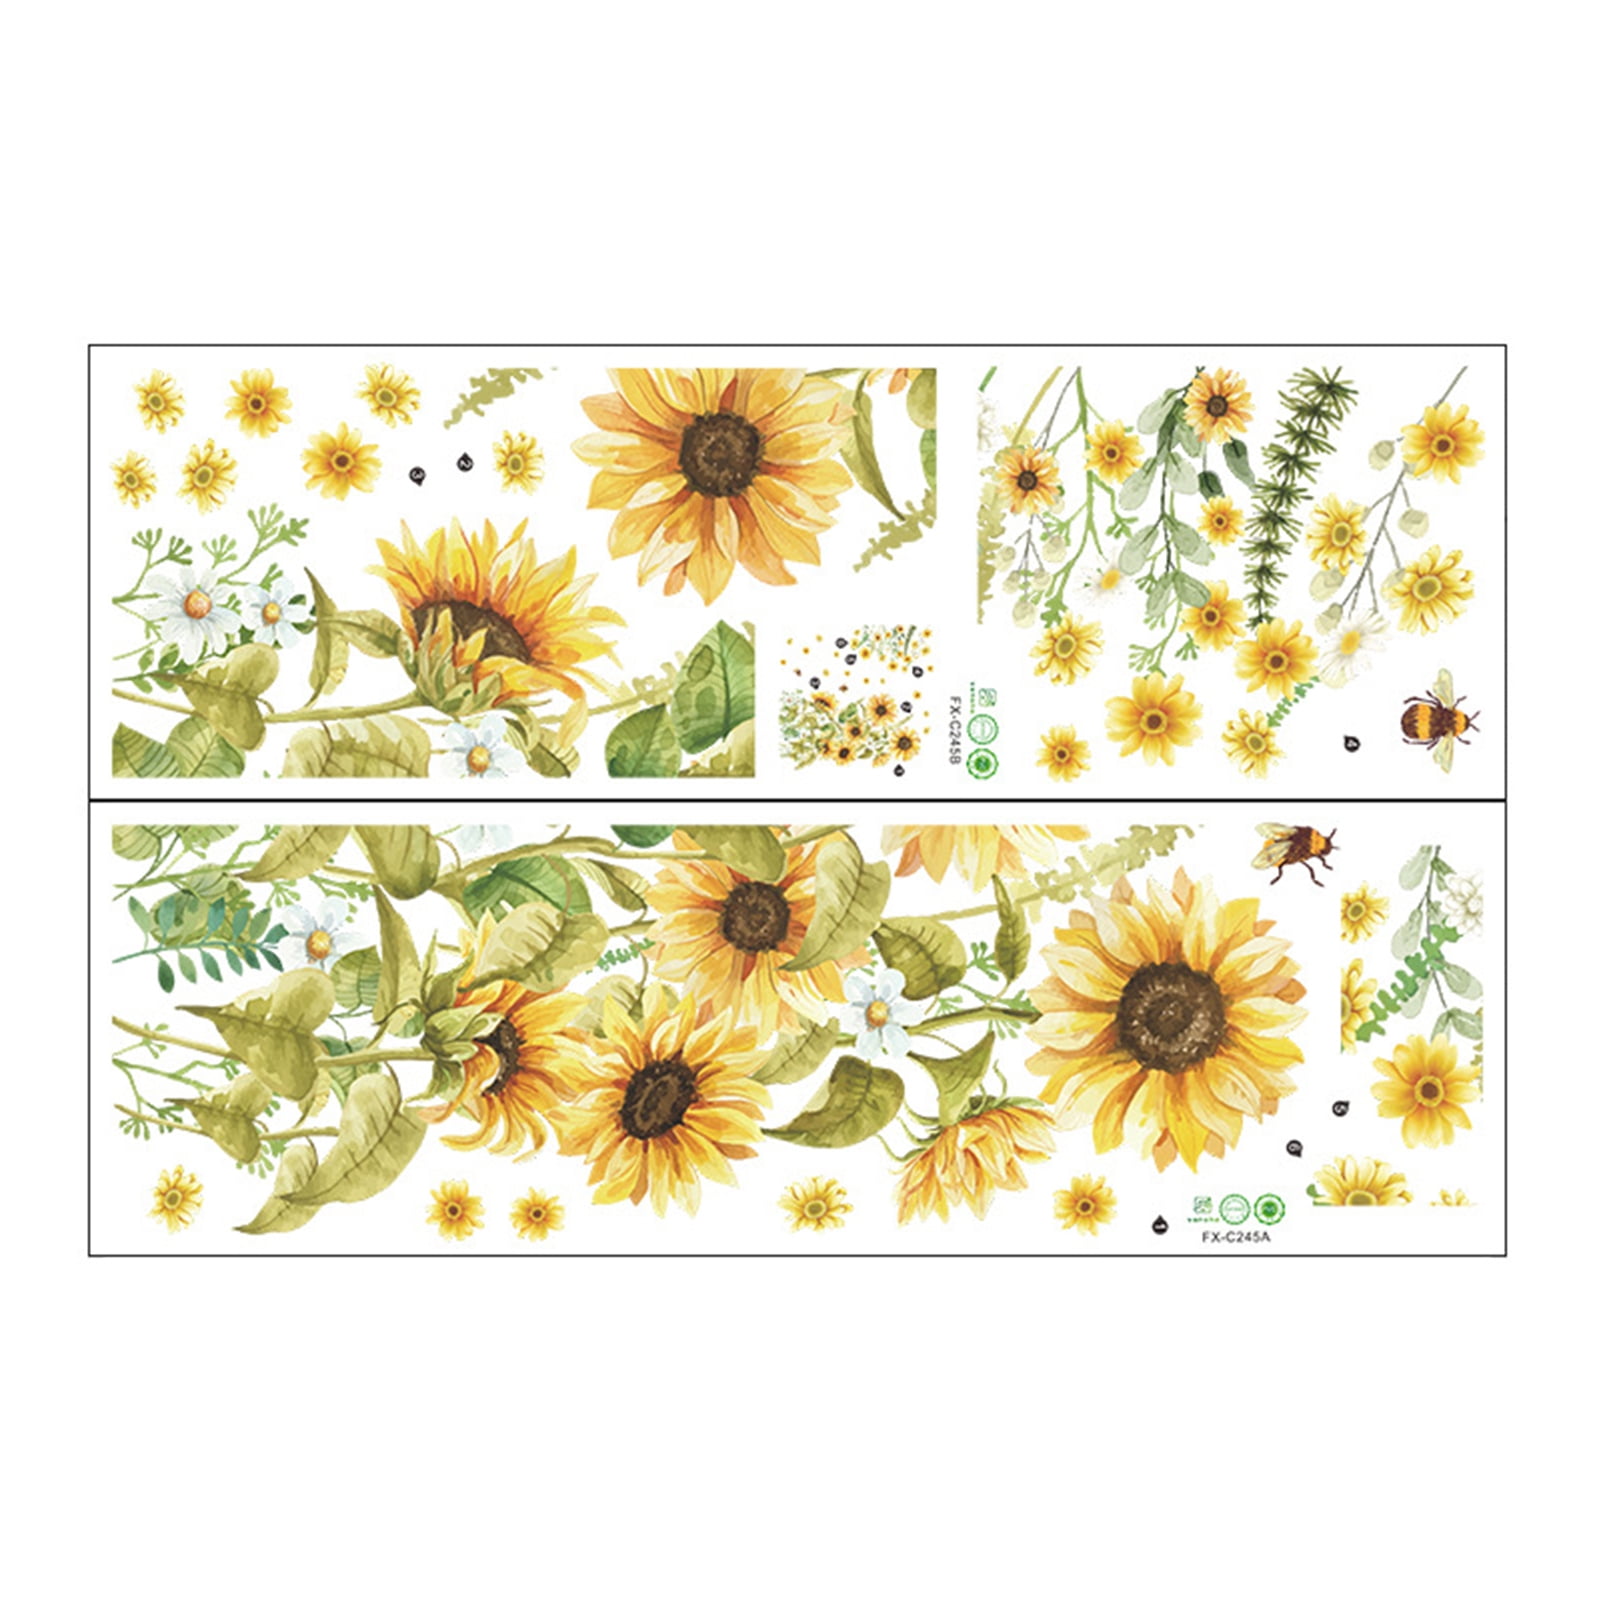 Details about   Removable Sunflower Wall Sticker Kitchen Waterproof Decals Home-Decor PVC Supply